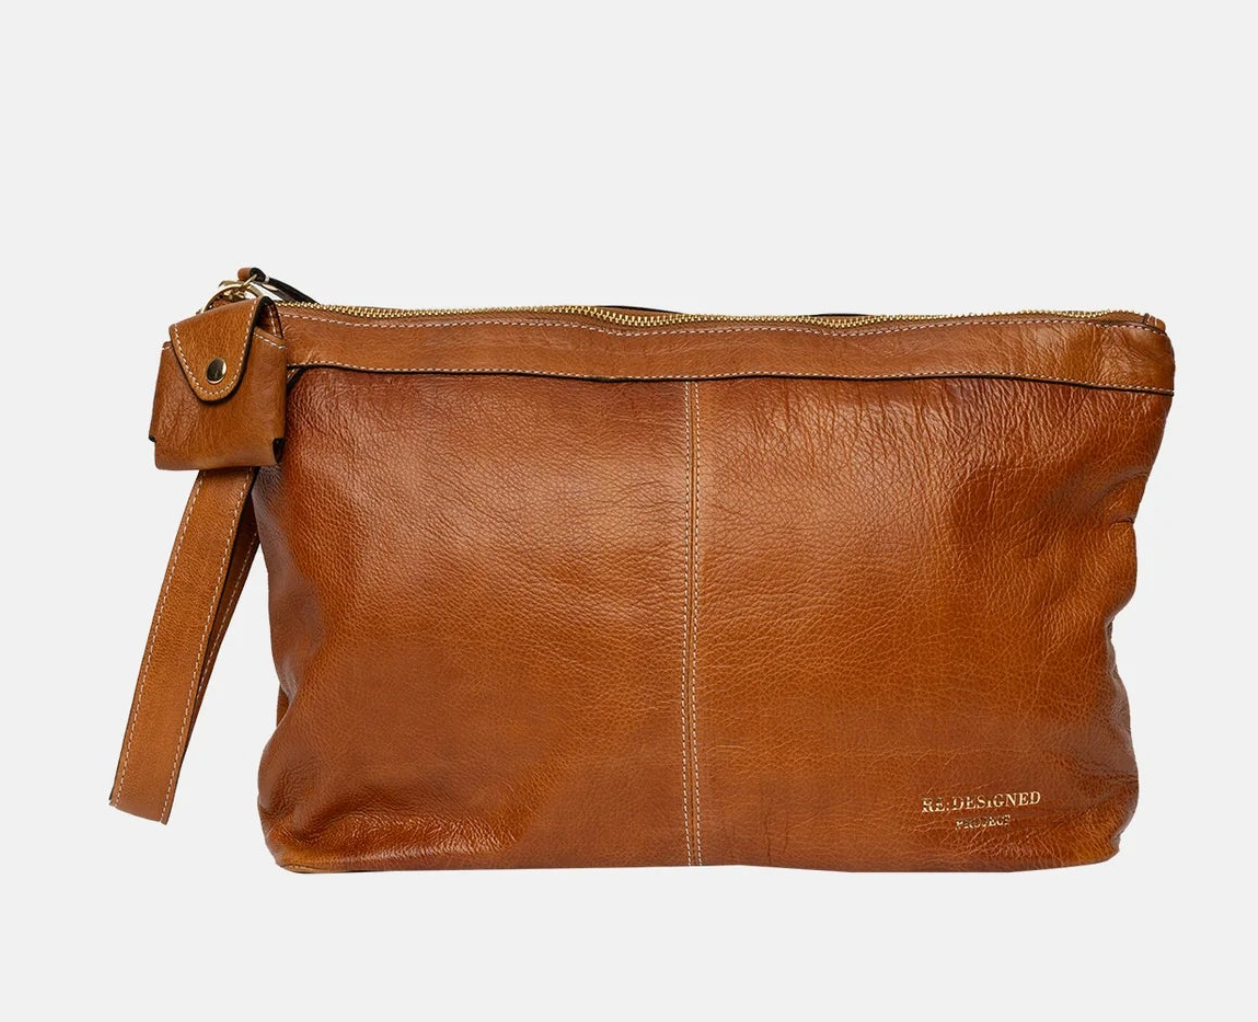 Re:designed PROJECT 13 - Leather Clutch Project Bag